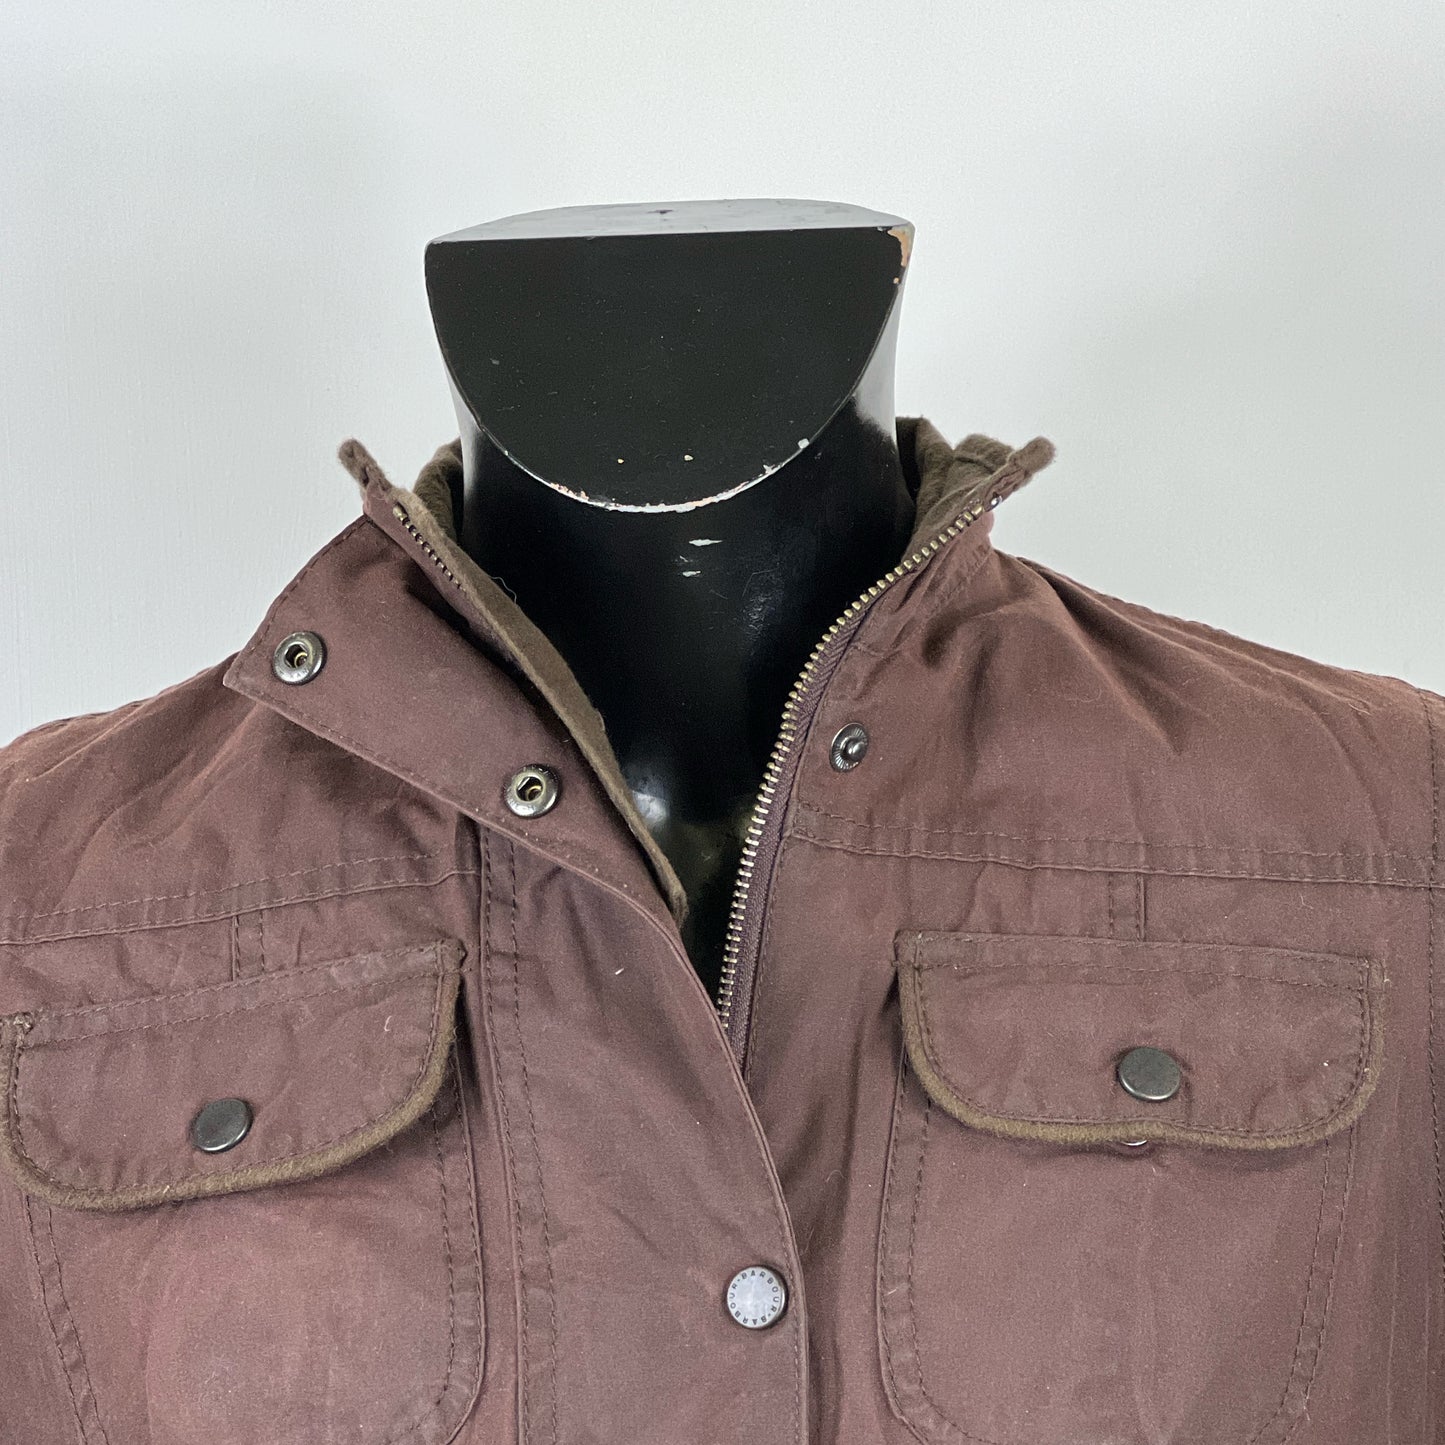 Giacca Barbour corta donna marrone UK8 Xsmall Brown short Lady Utility jacket XS tg.38